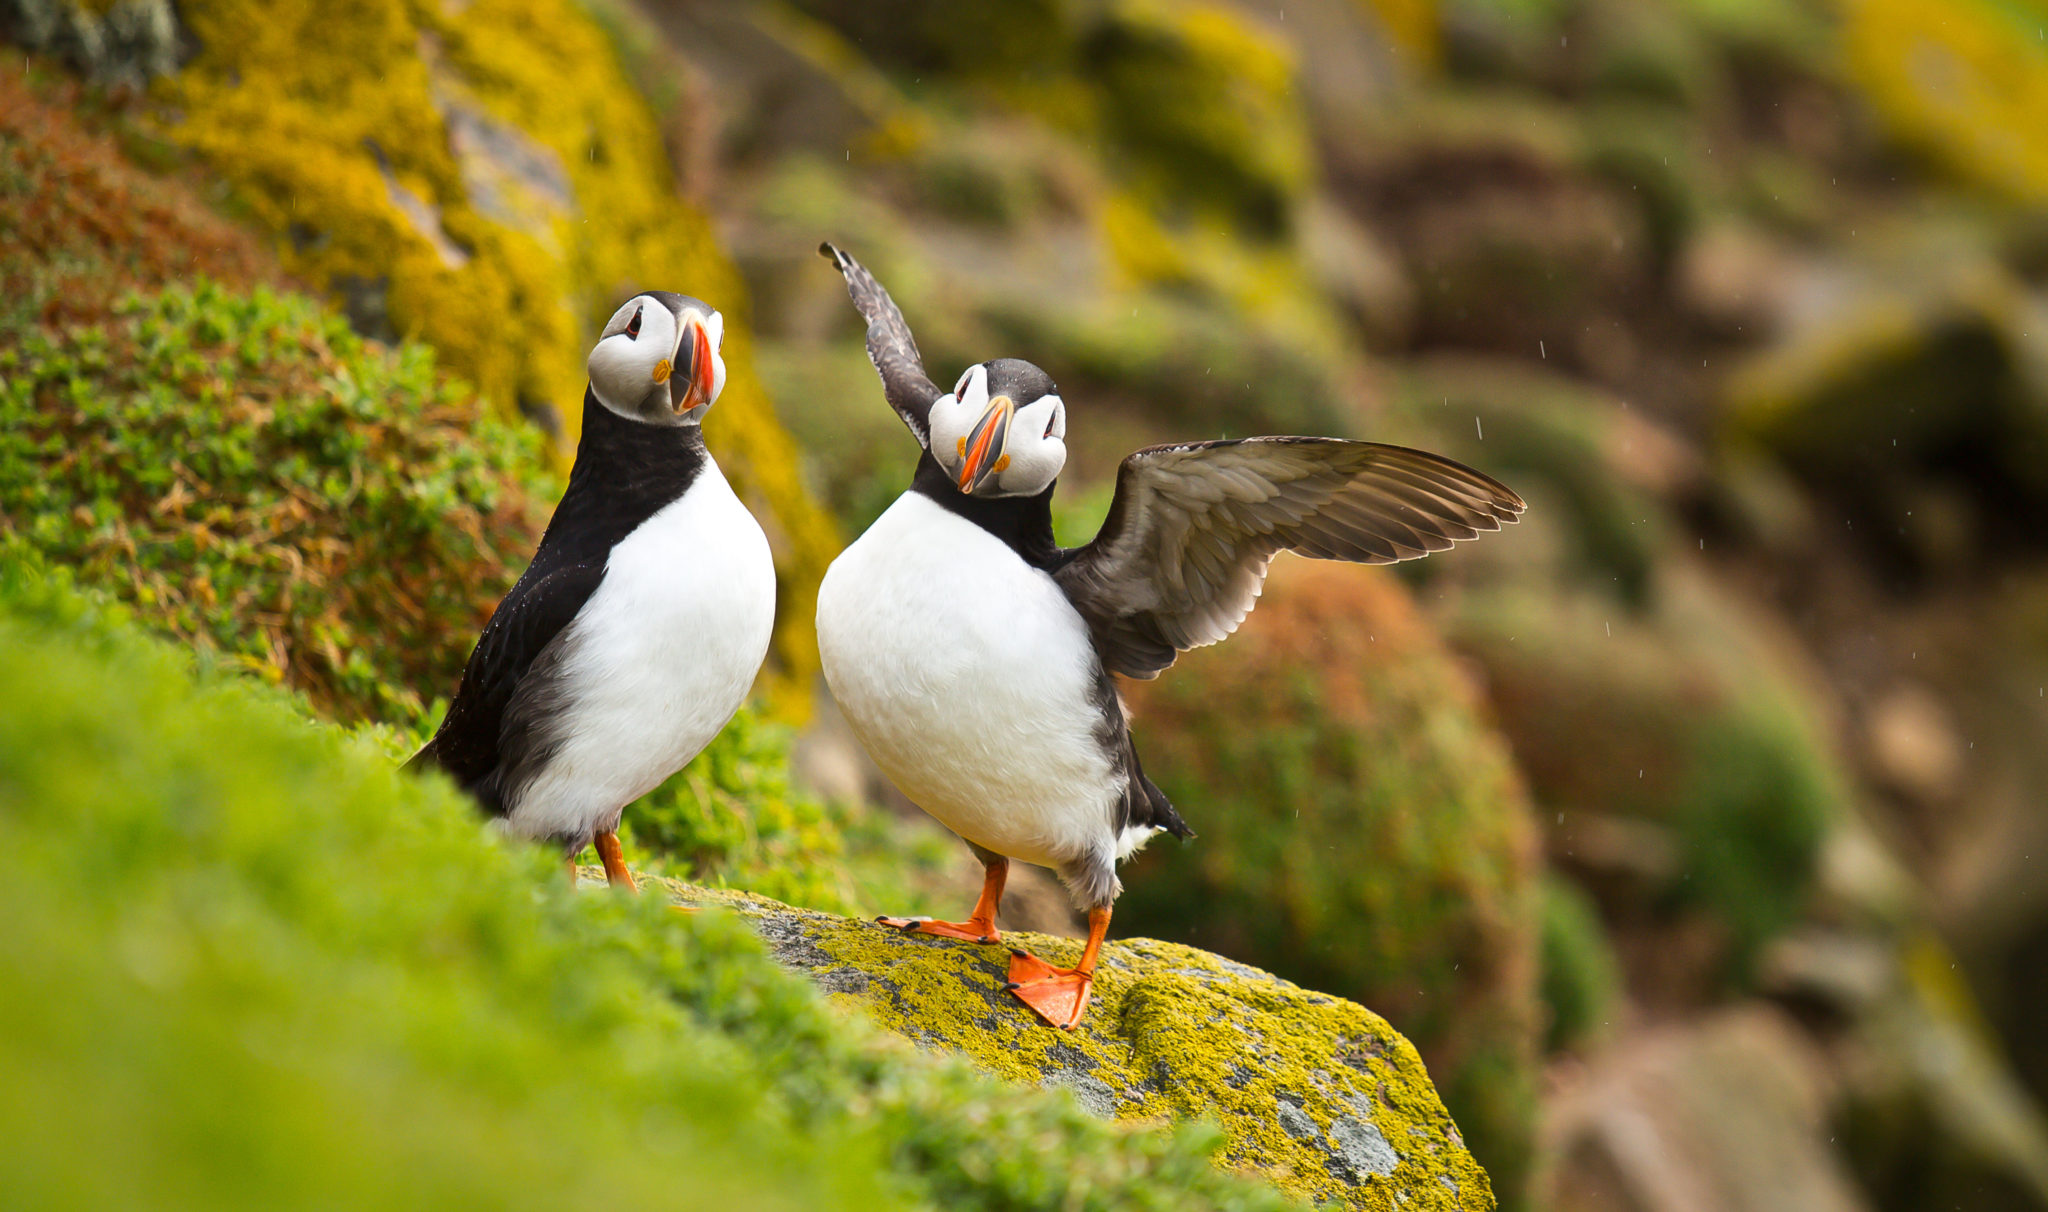 Atlantic Puffins on a rock